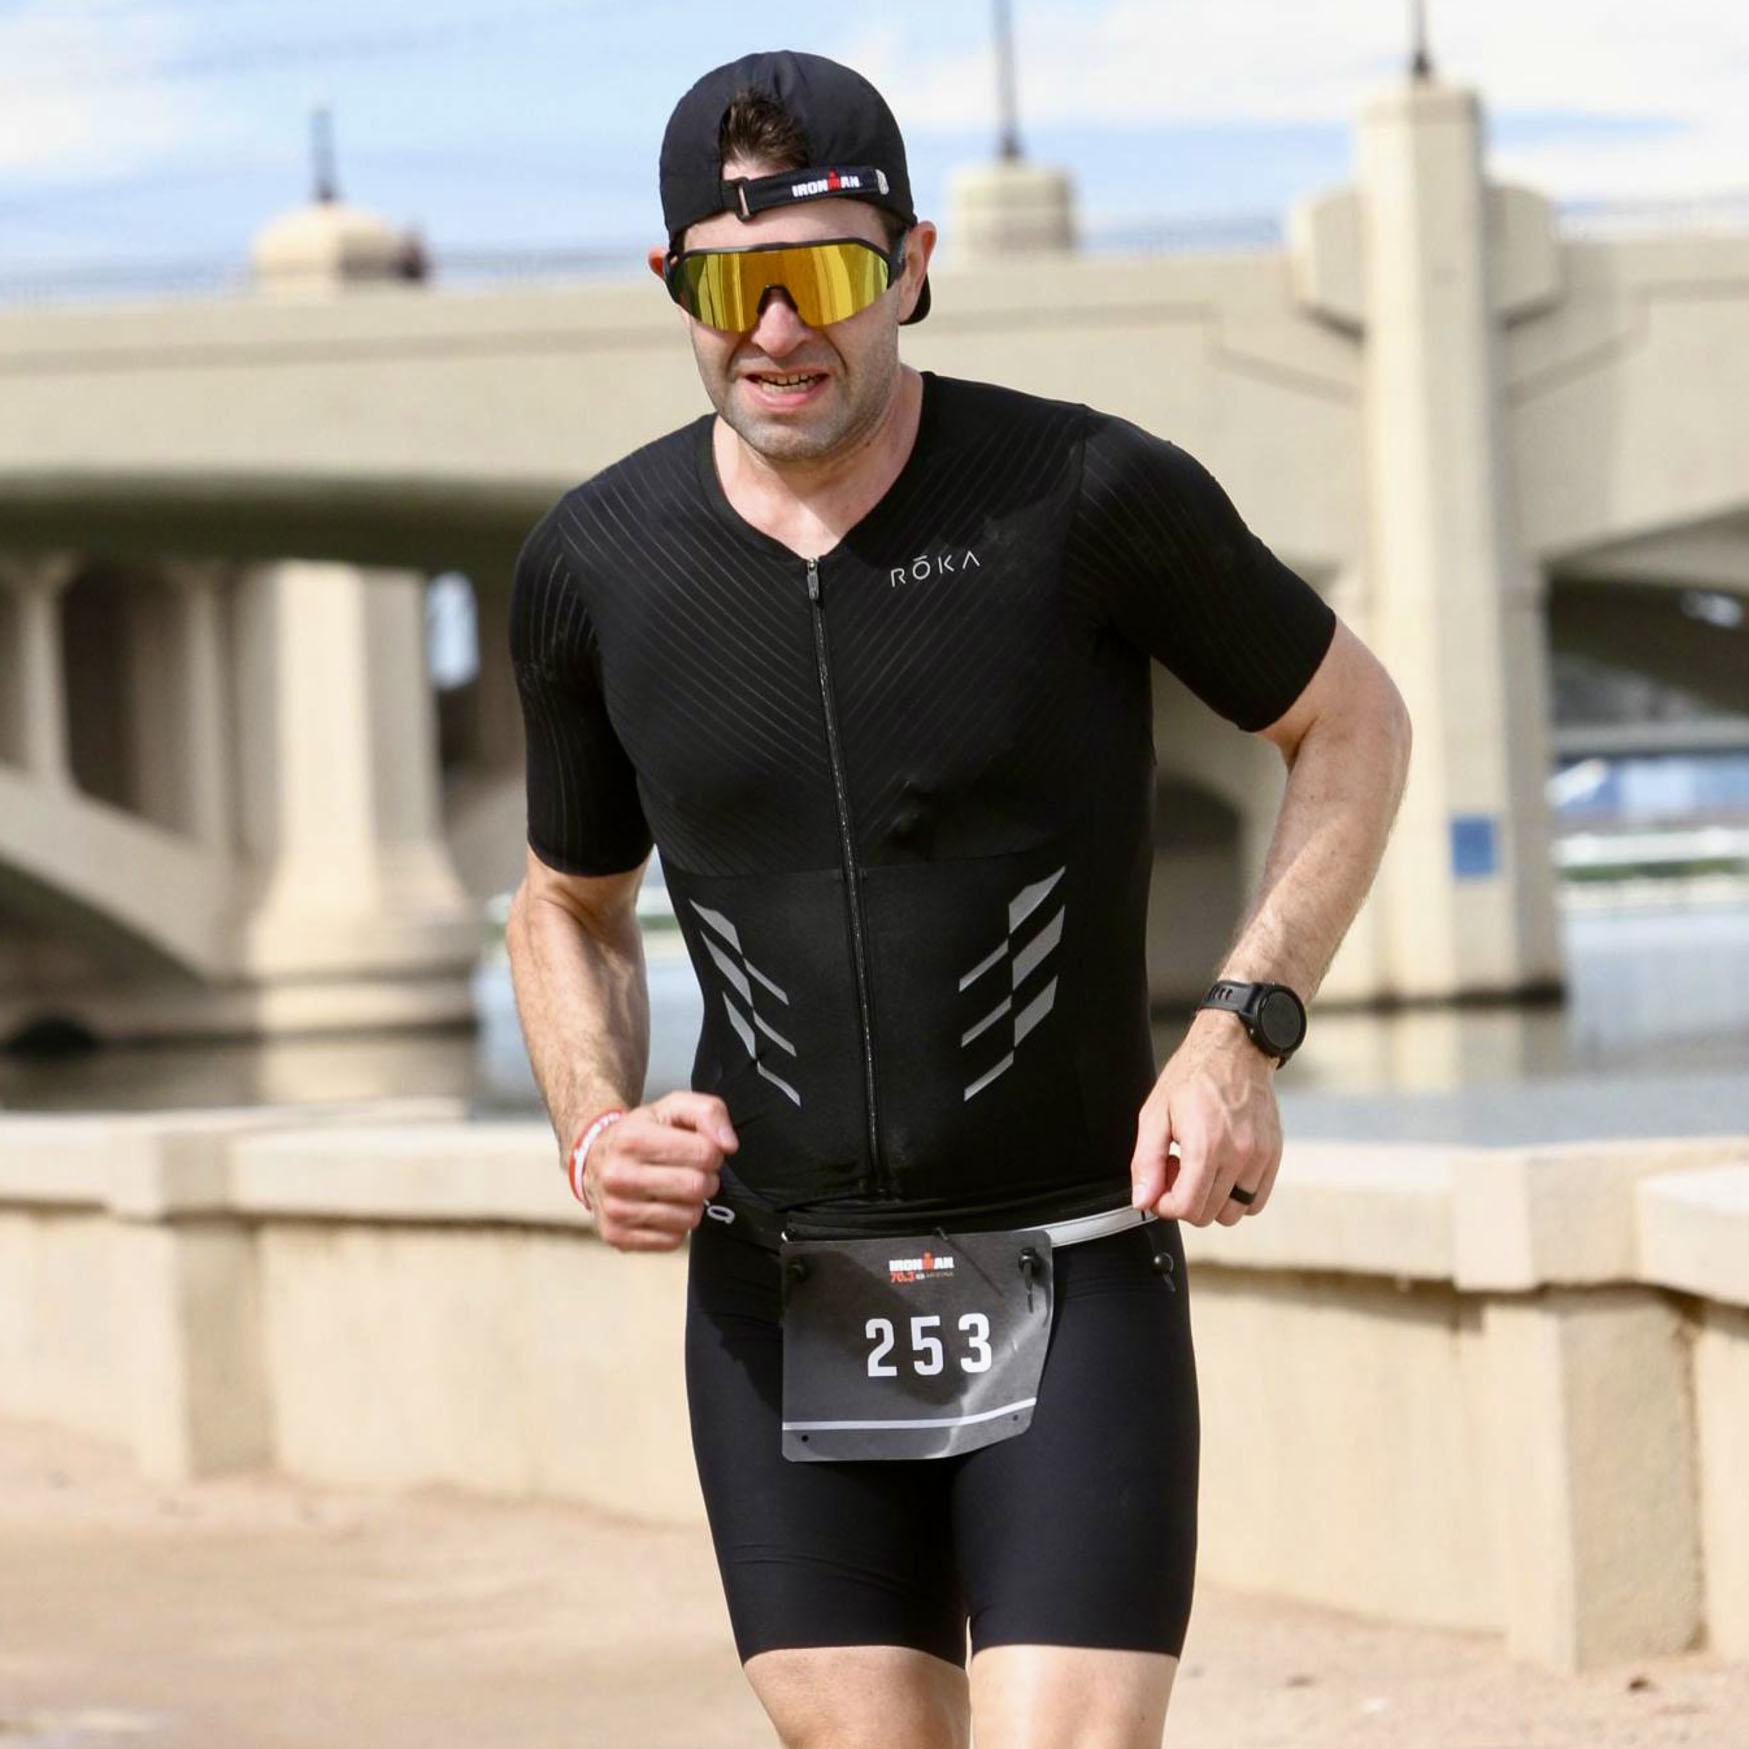 Me, running on a dirt path, with the Mill Avenue Bridge in Tempe in the background. I'm wearing a black running hat backwards, gold sunglasses, black tri suit, and orange shoes.